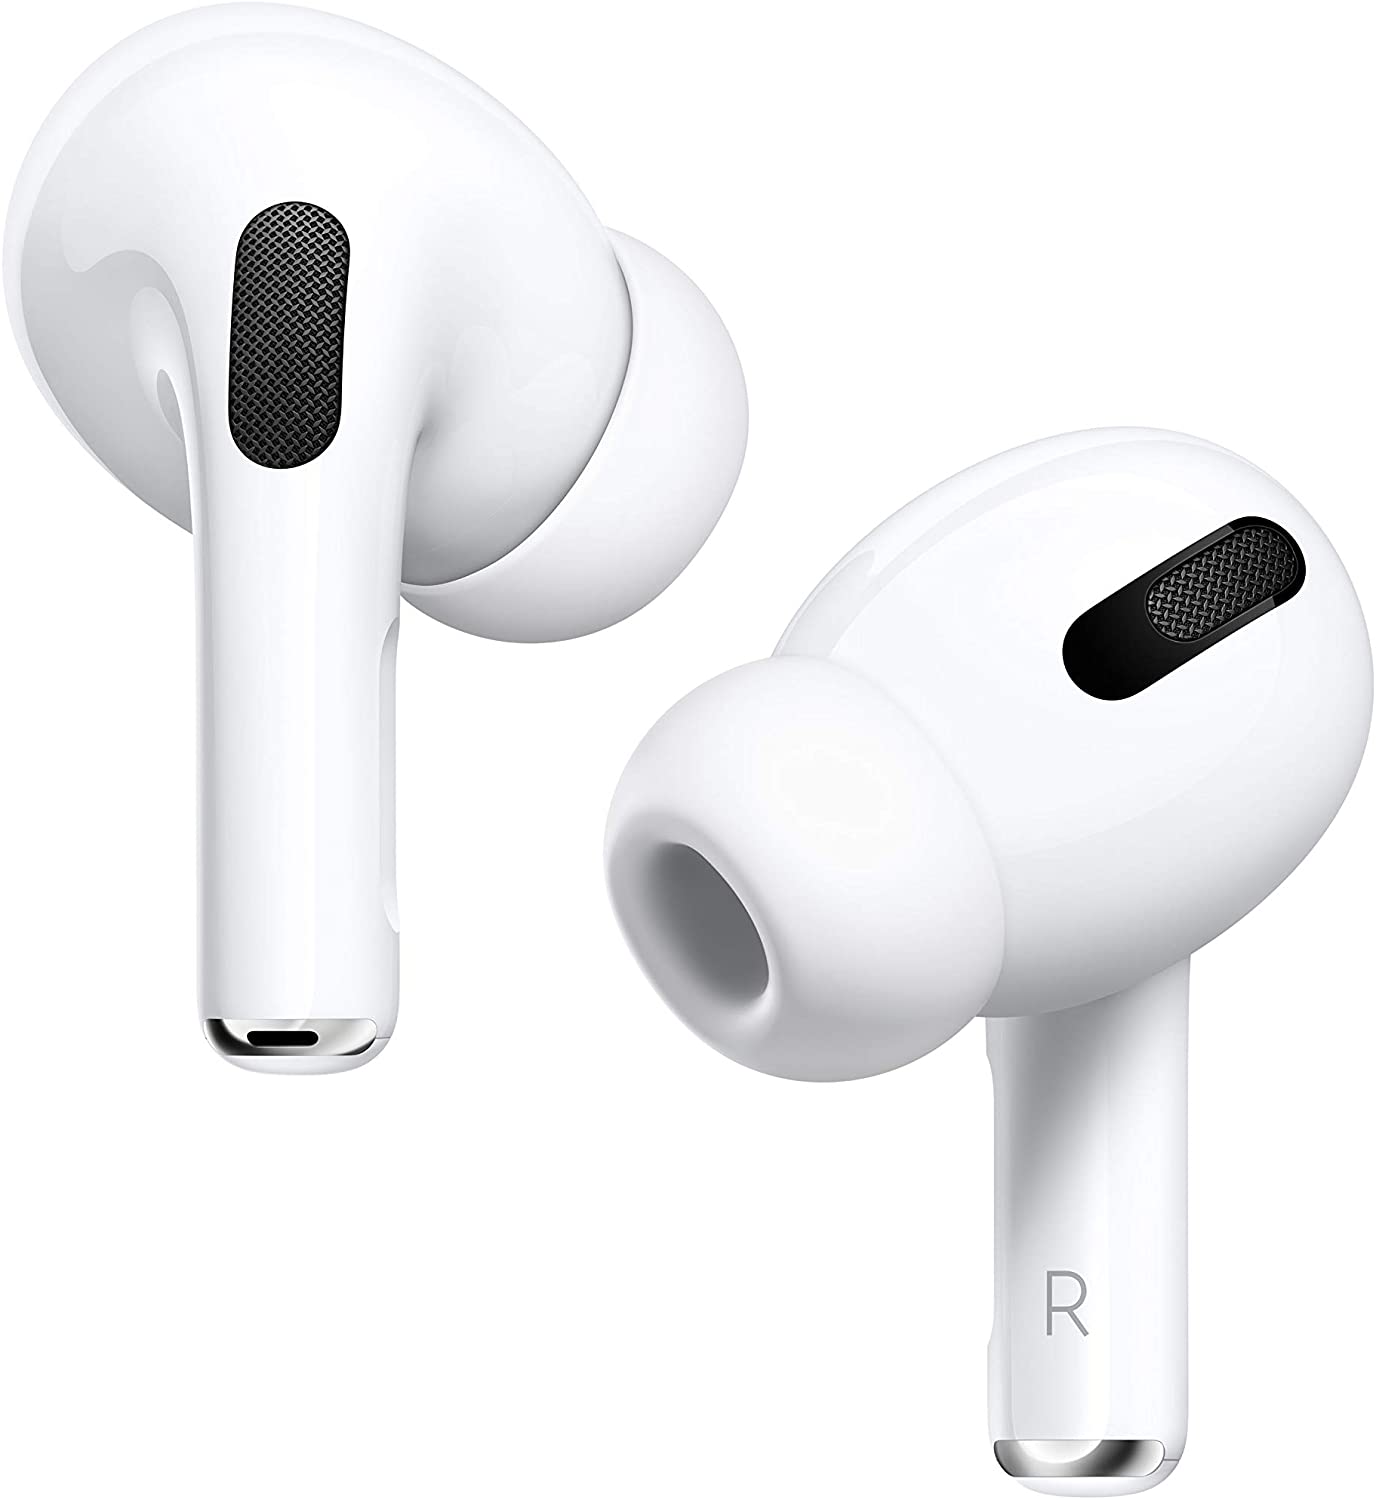 Costco Members: Apple AirPods Pro with Wireless Charging Case in store for $169.99